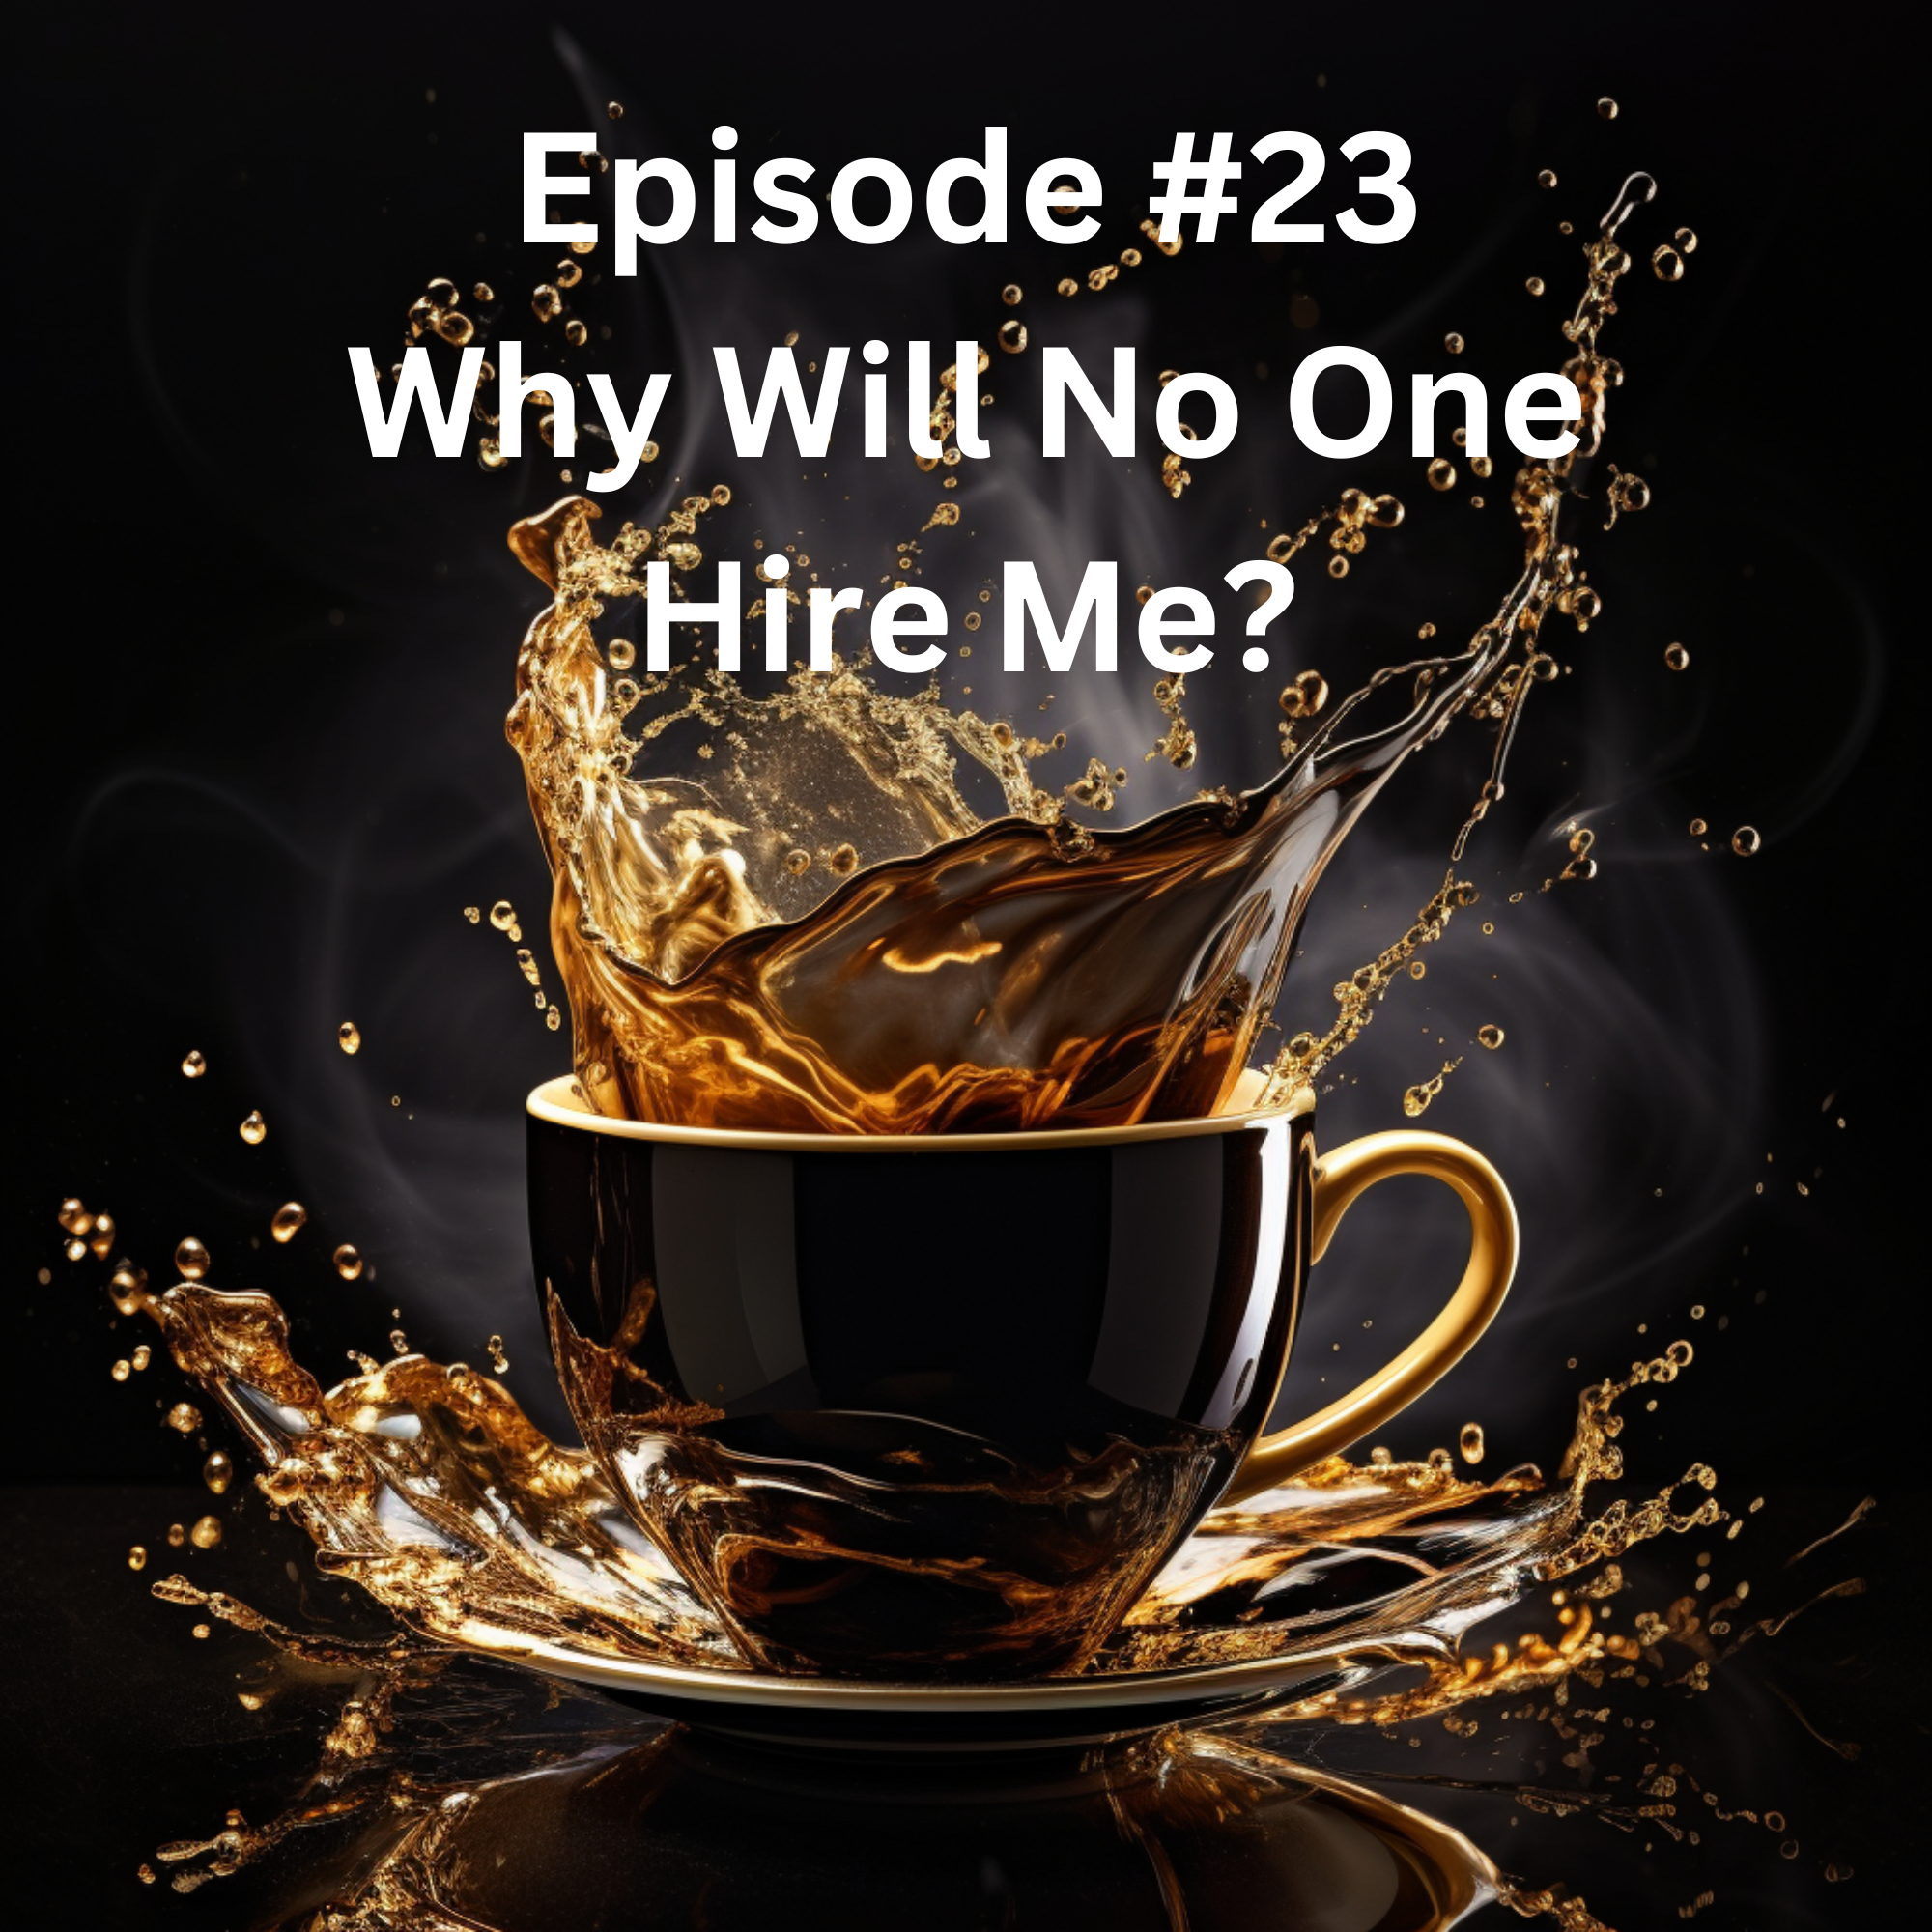 Episode #23 Why Will No One Hire Me?